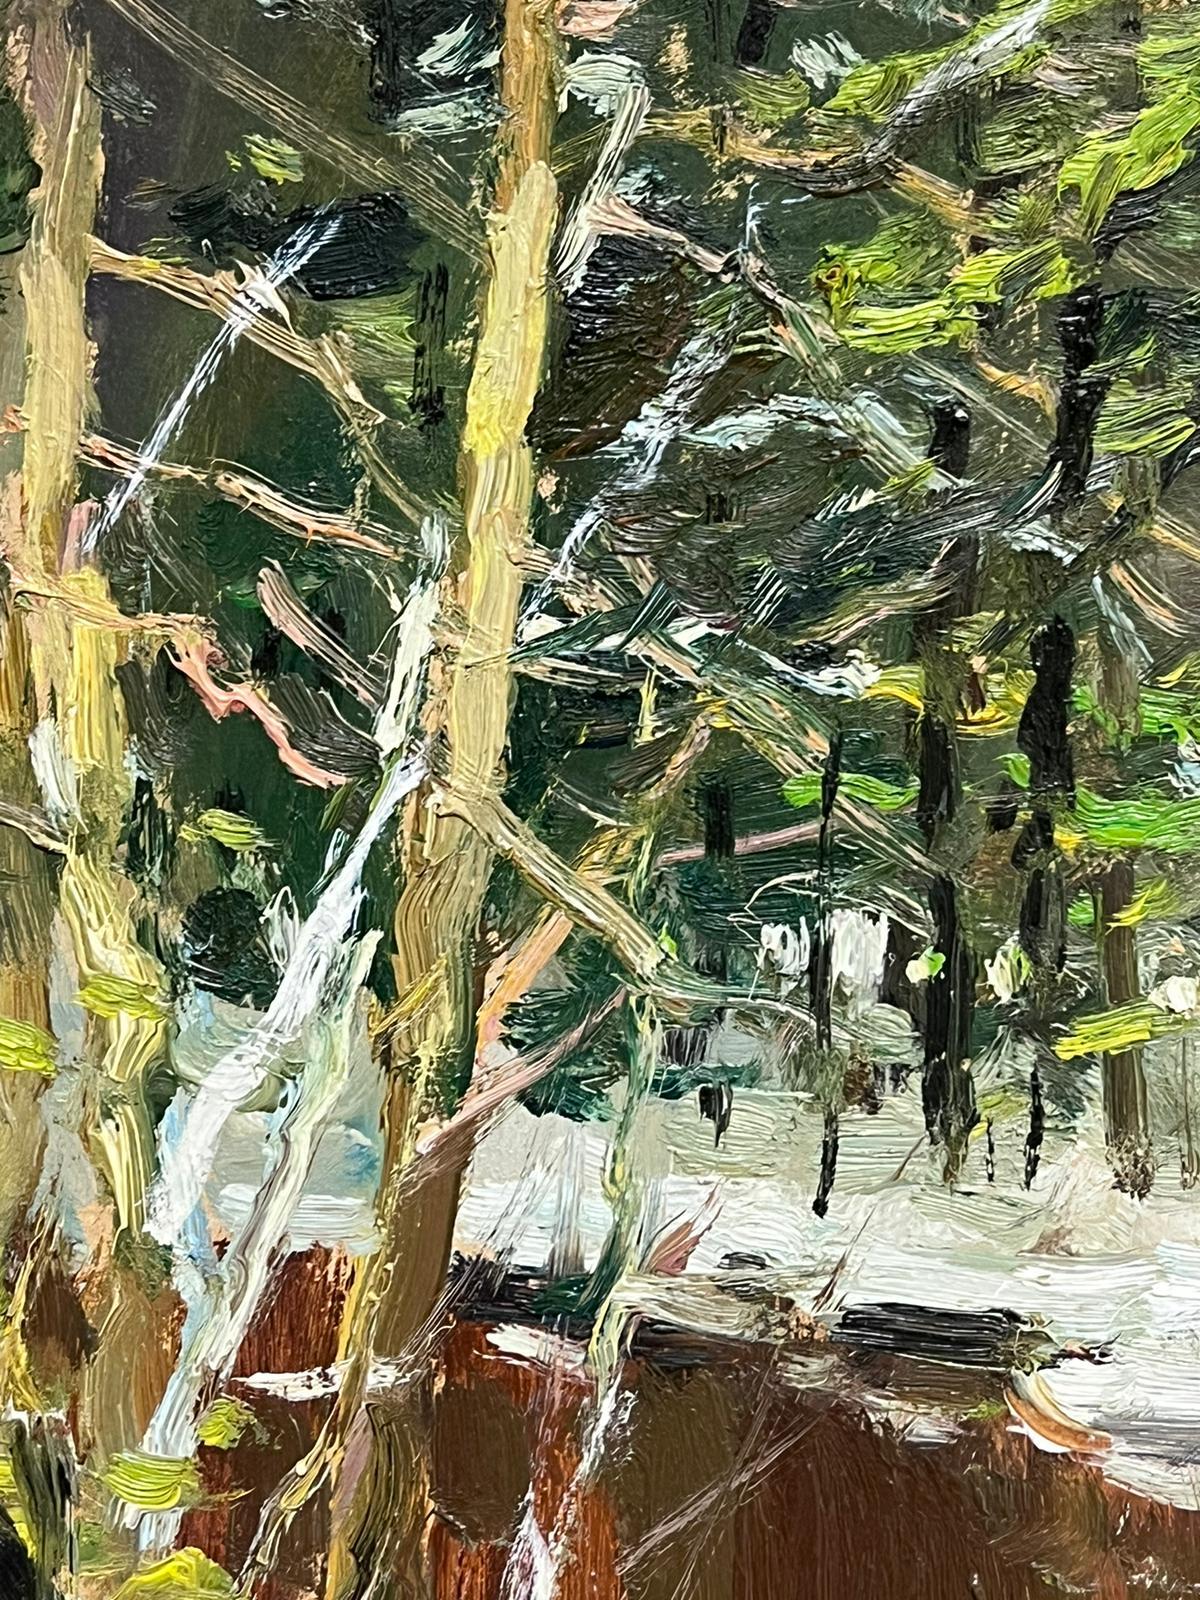 The Winter Woodland
by Edgars Vinters (Latvian 1919-2014) *see below for details
signed & dated 1994
oil on board, framed
framed: 33 x 27 inches
painting: 24 x 18 inches
provenance: private collection, UK
condition: very good and sound